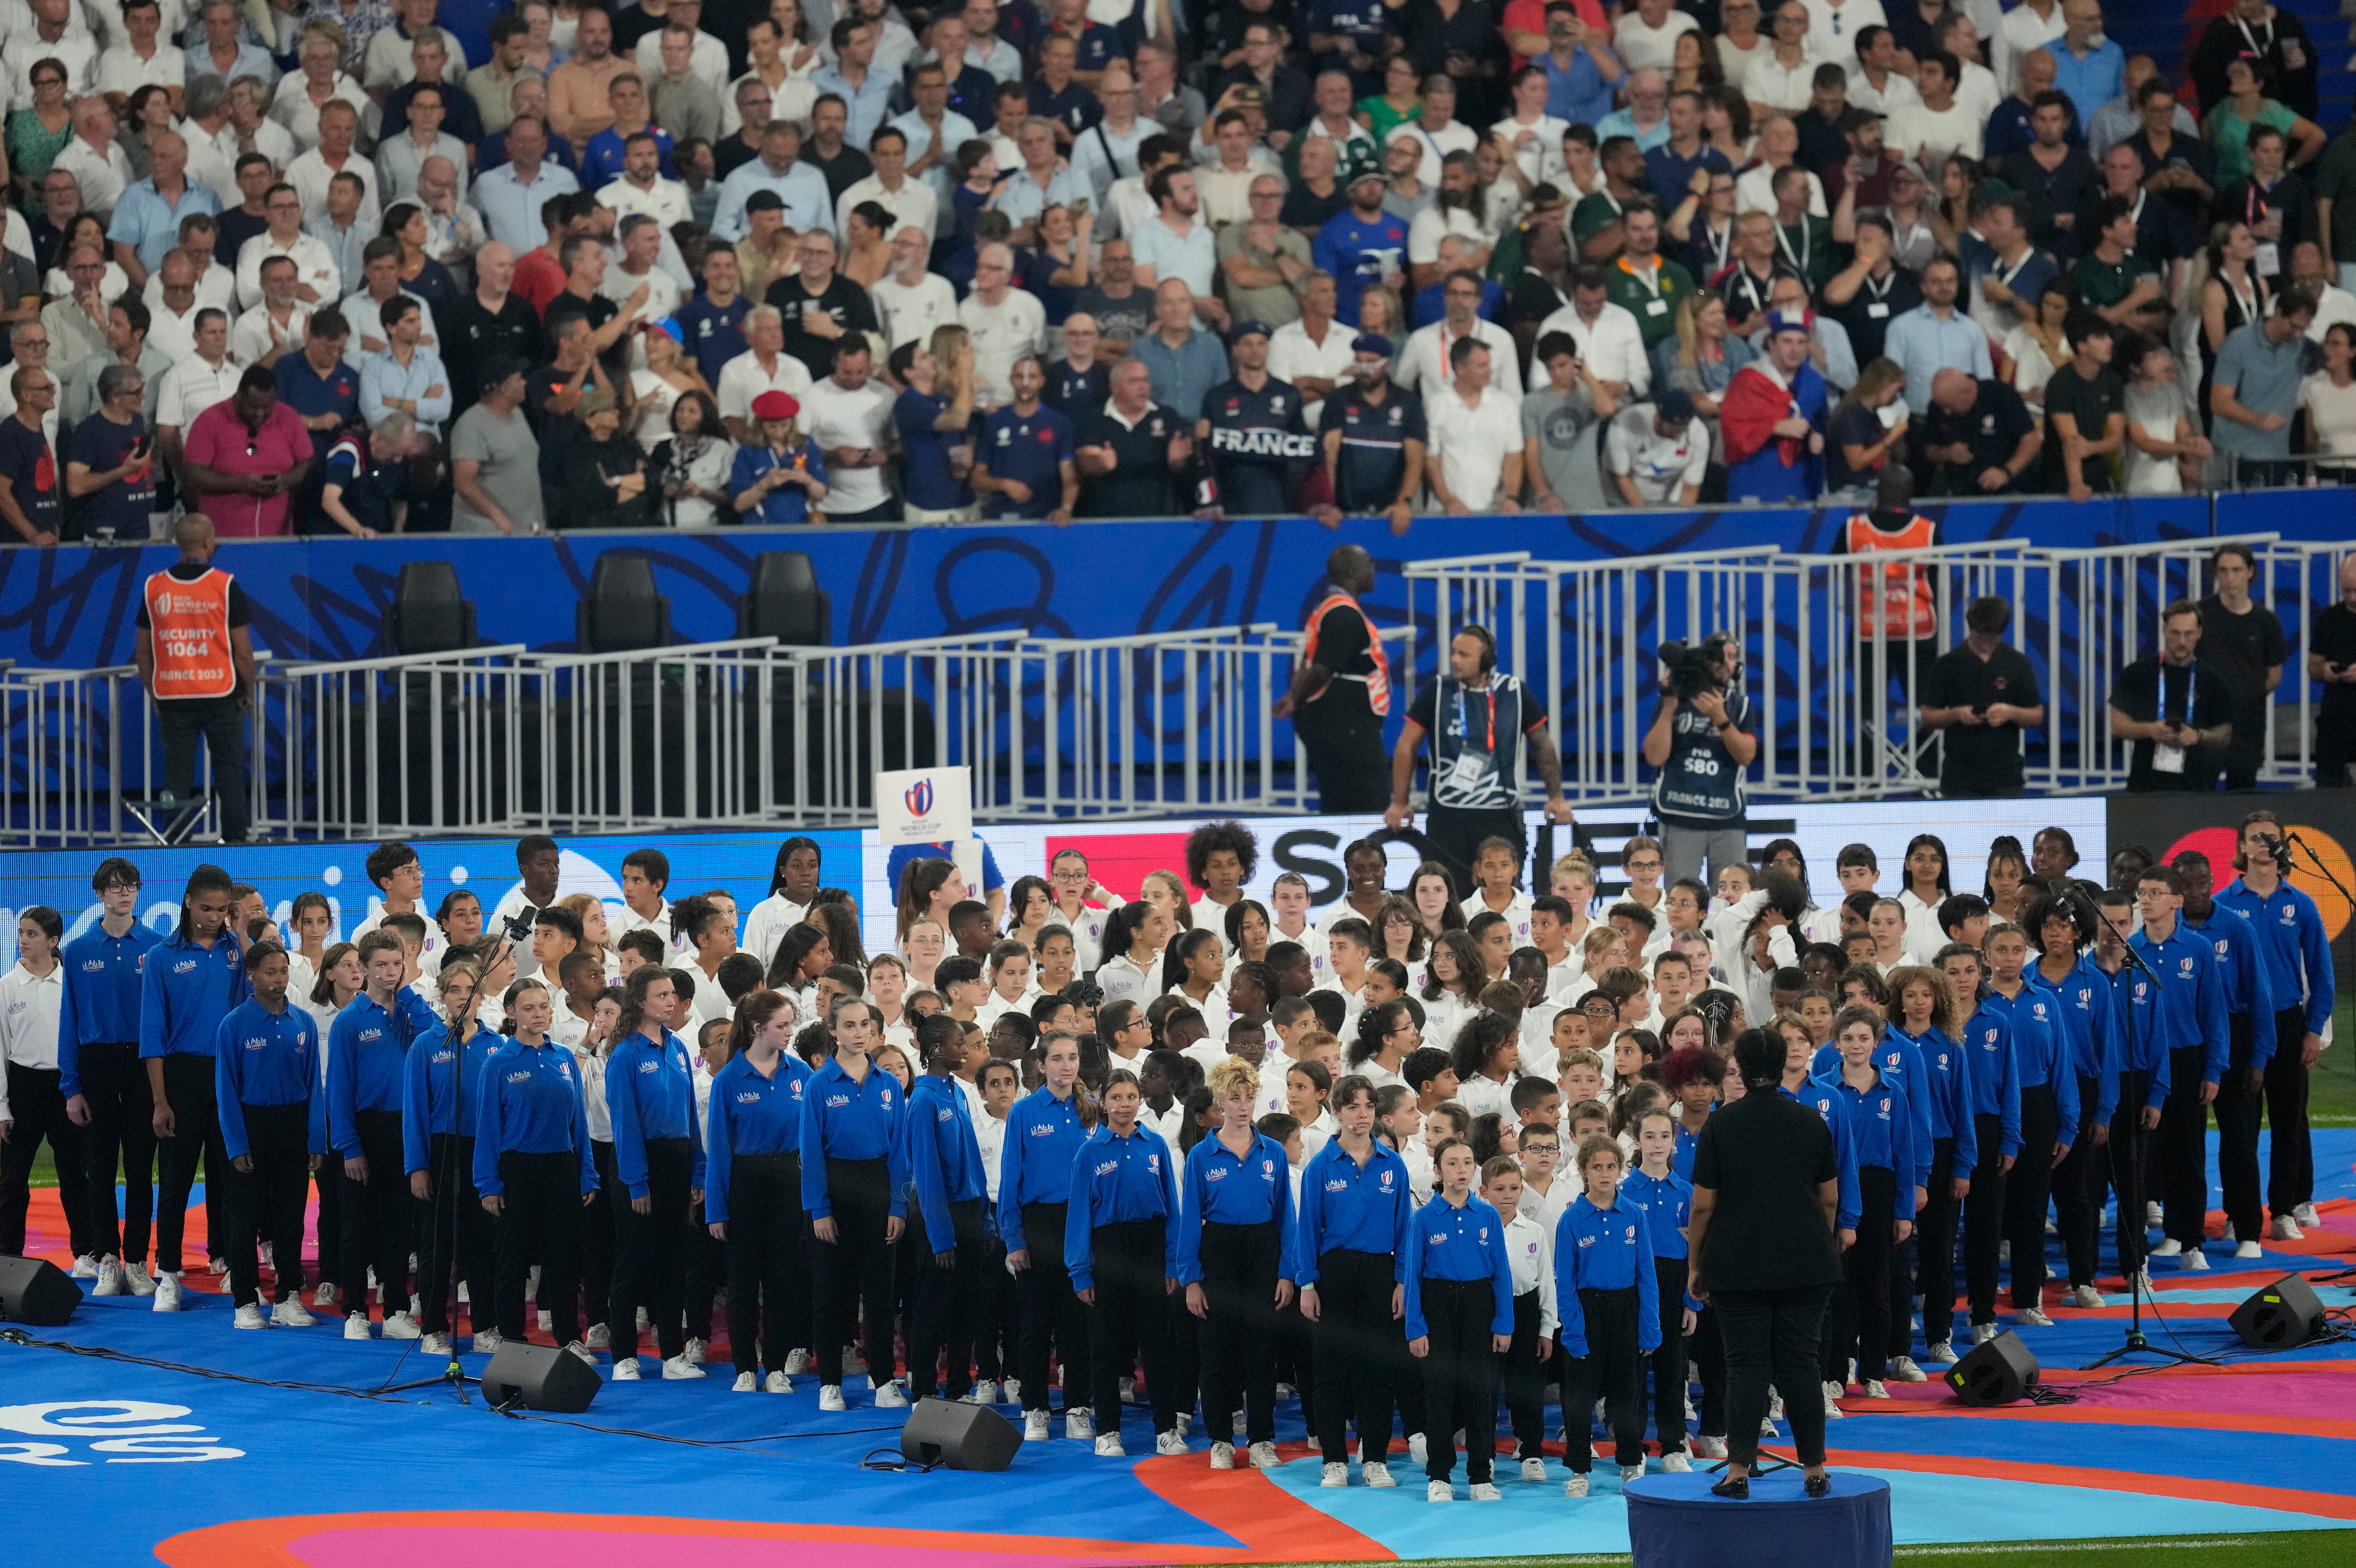 The choir were performing in person at the World Cup opener